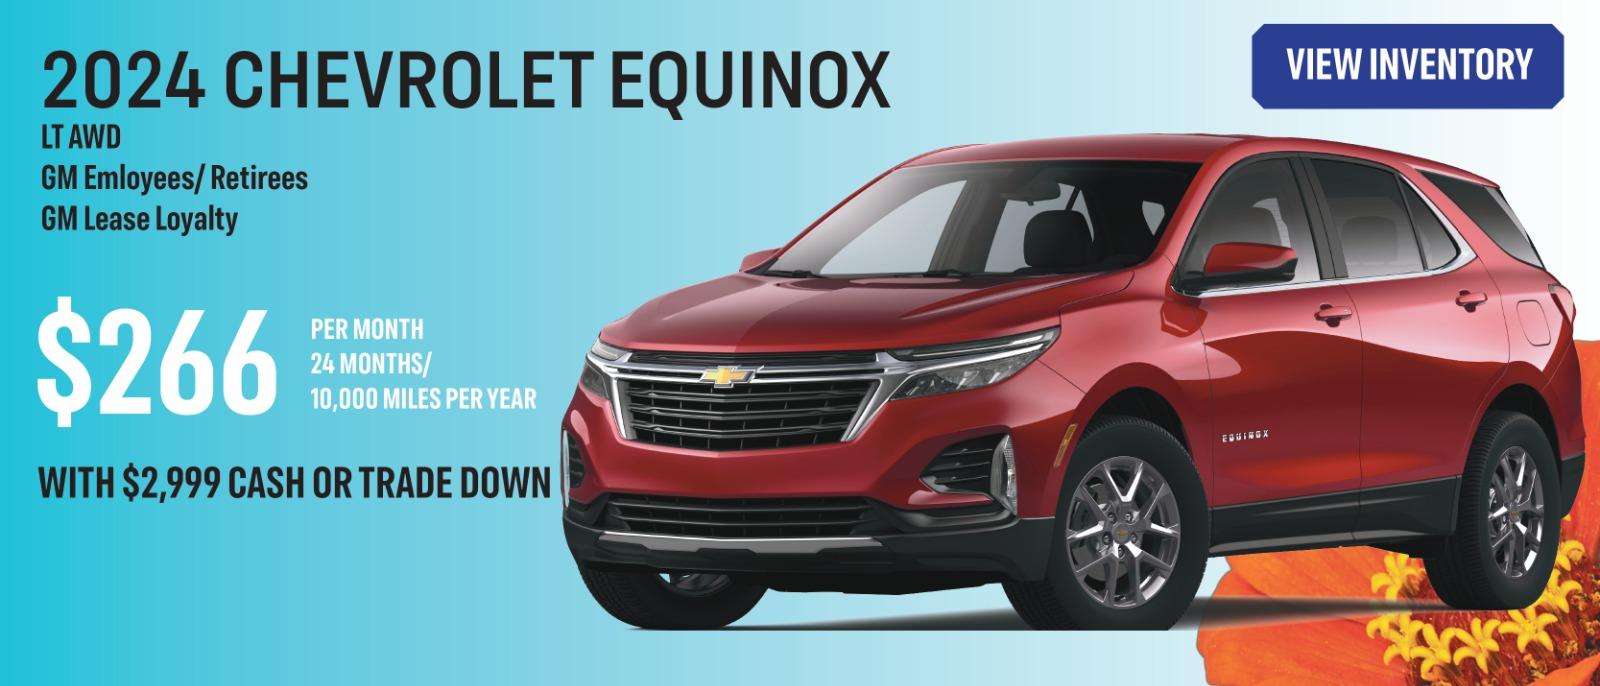 2024 Equinox LT AWD
$266 PER MONTH
24 MONTHS/
10,000 MILES PER YEAR